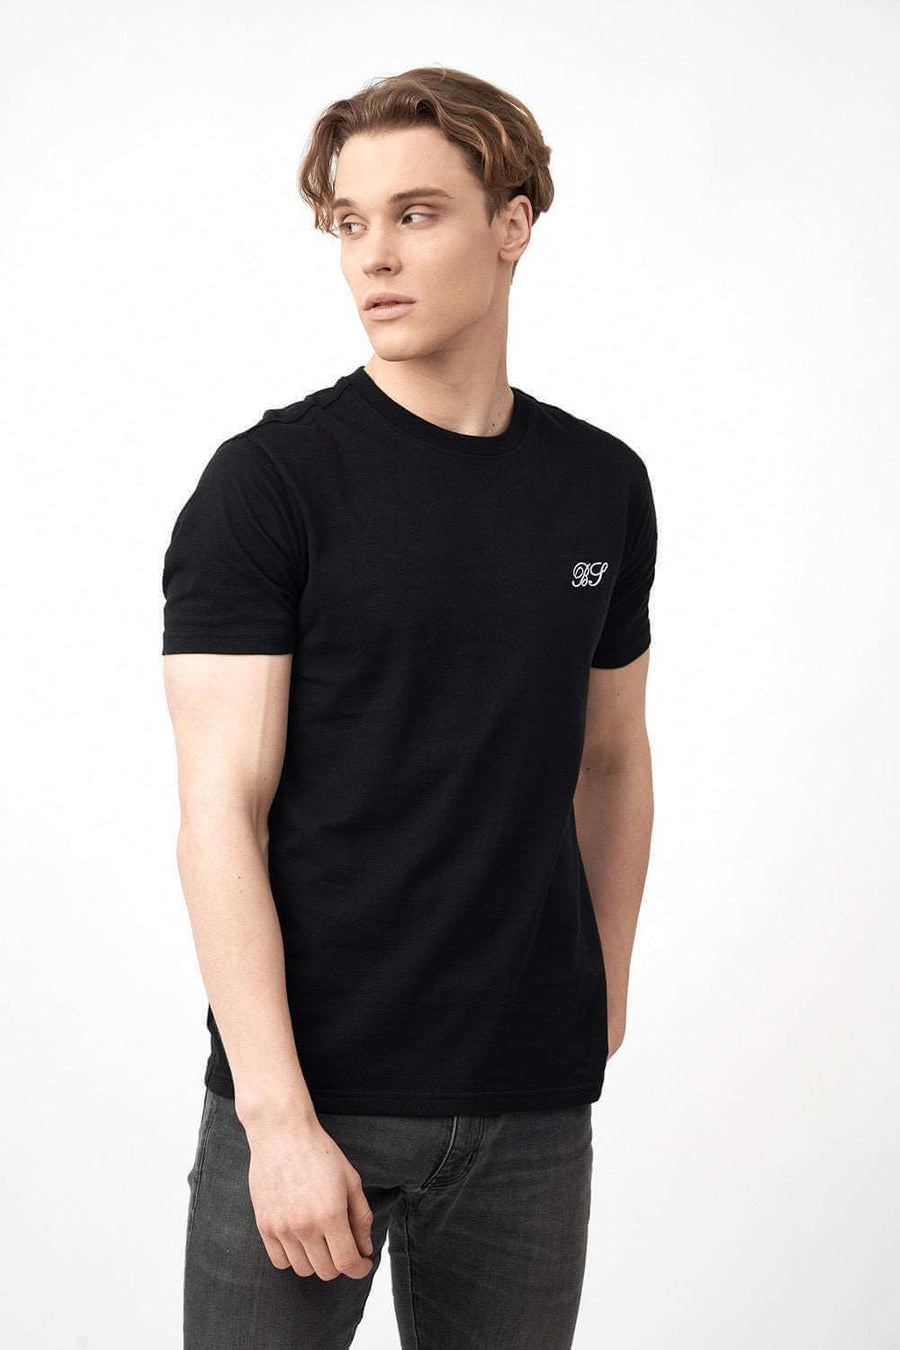 Right Side View of Men's Short Sleeve Shirts in Black with Logo Print